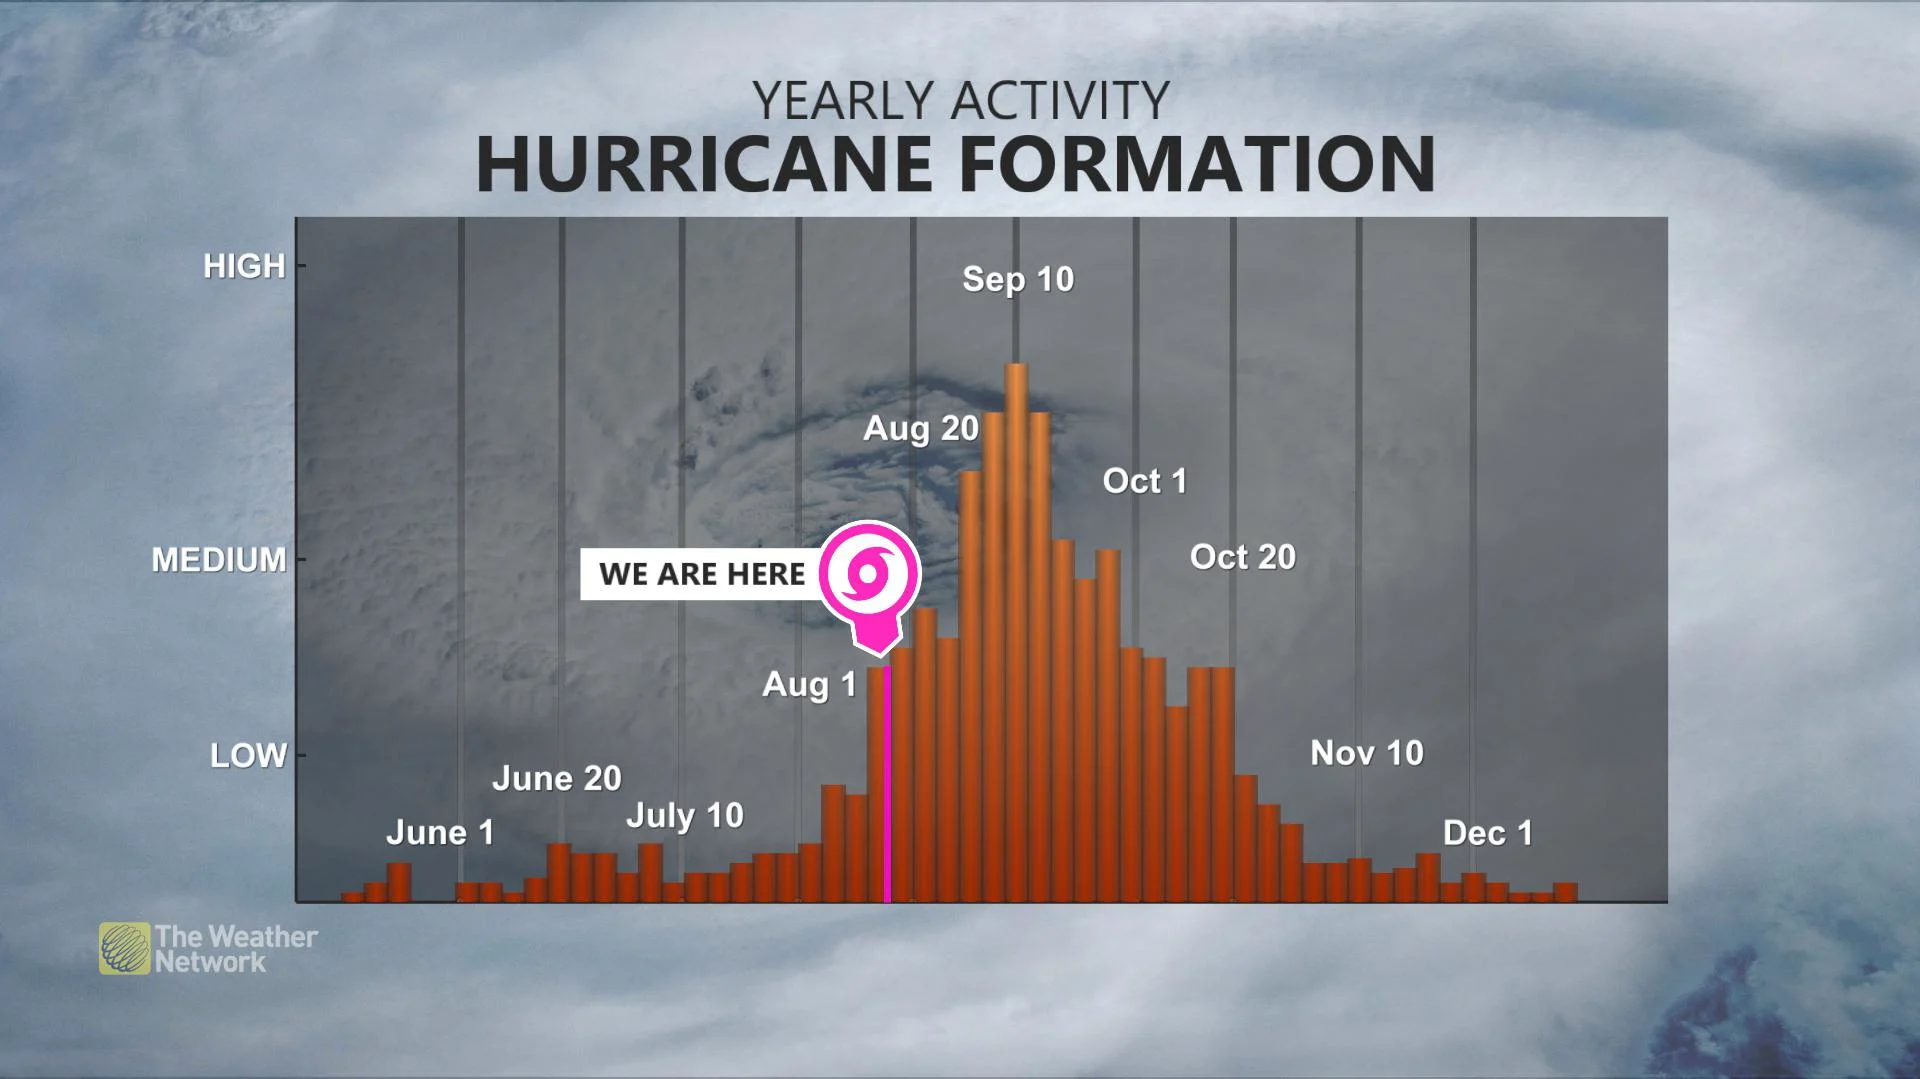 Hurricane Stats for 2020. Courtesy of NOAA